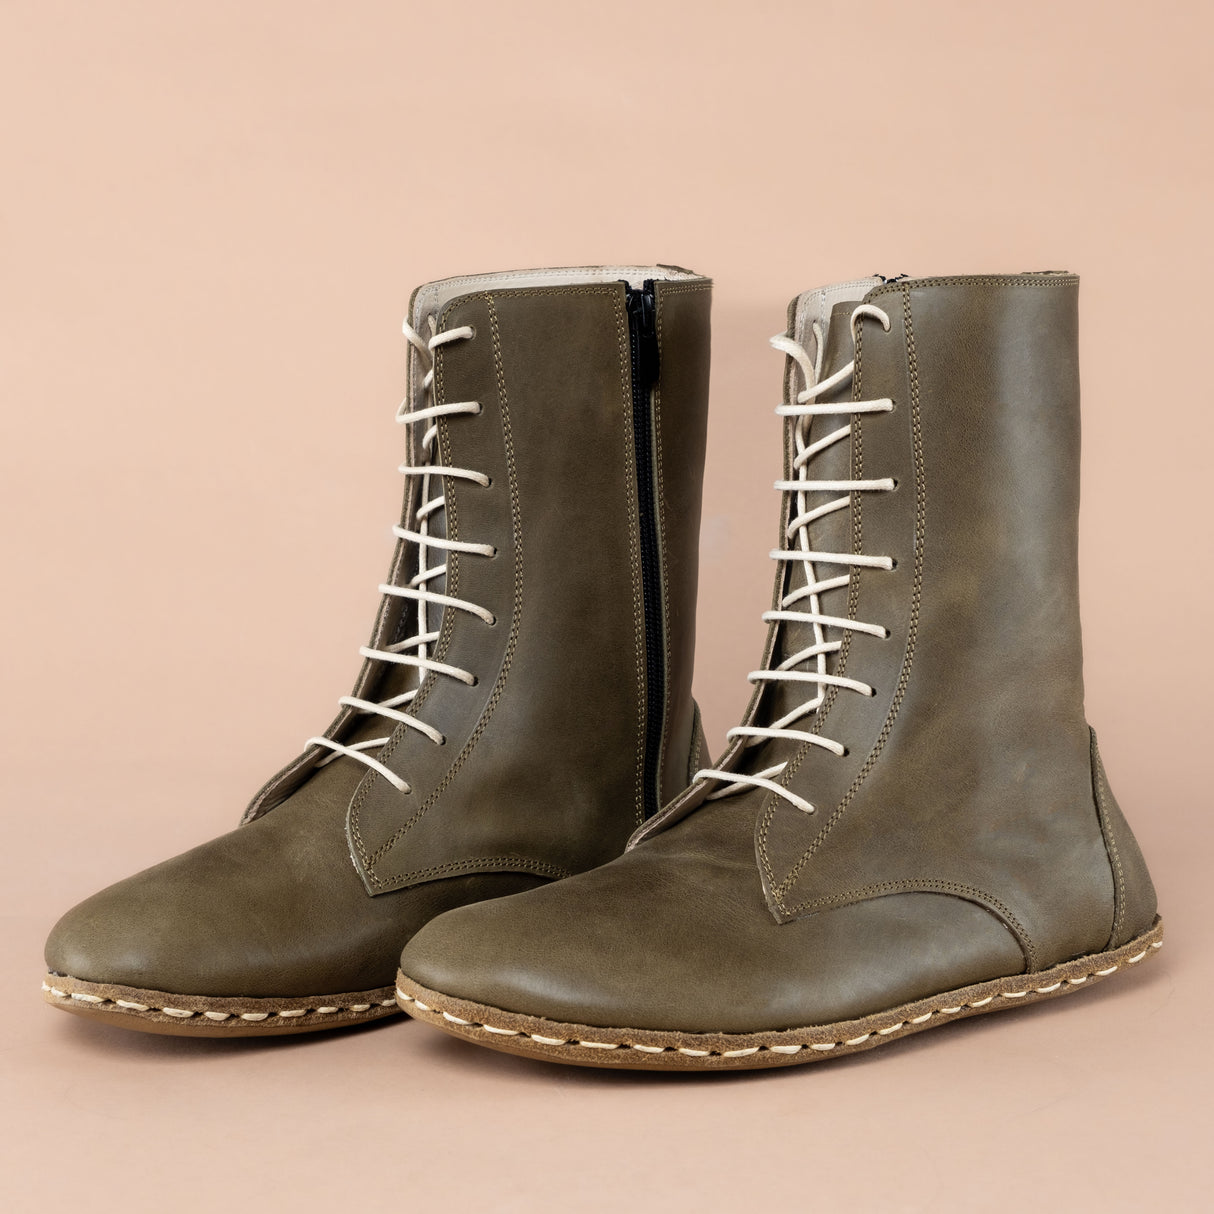 Men's Green Barefoot High Ankle Boots